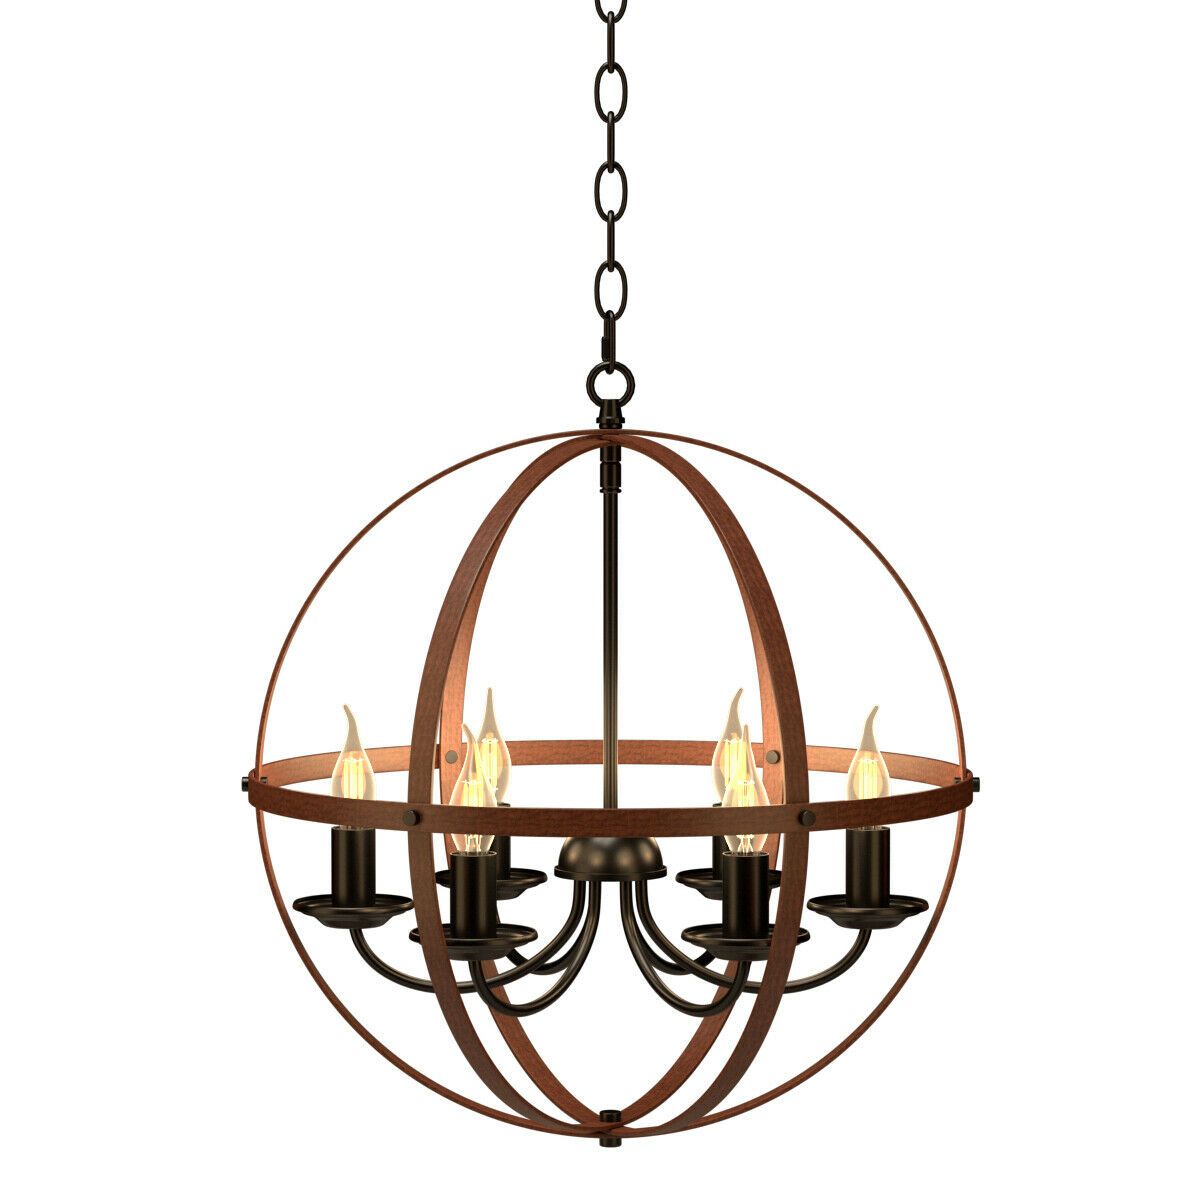 Gymax 6 Light Orb Chandelier Rustic Vintage Ceiling Lamp W Inside Six Light Chandeliers (View 3 of 15)